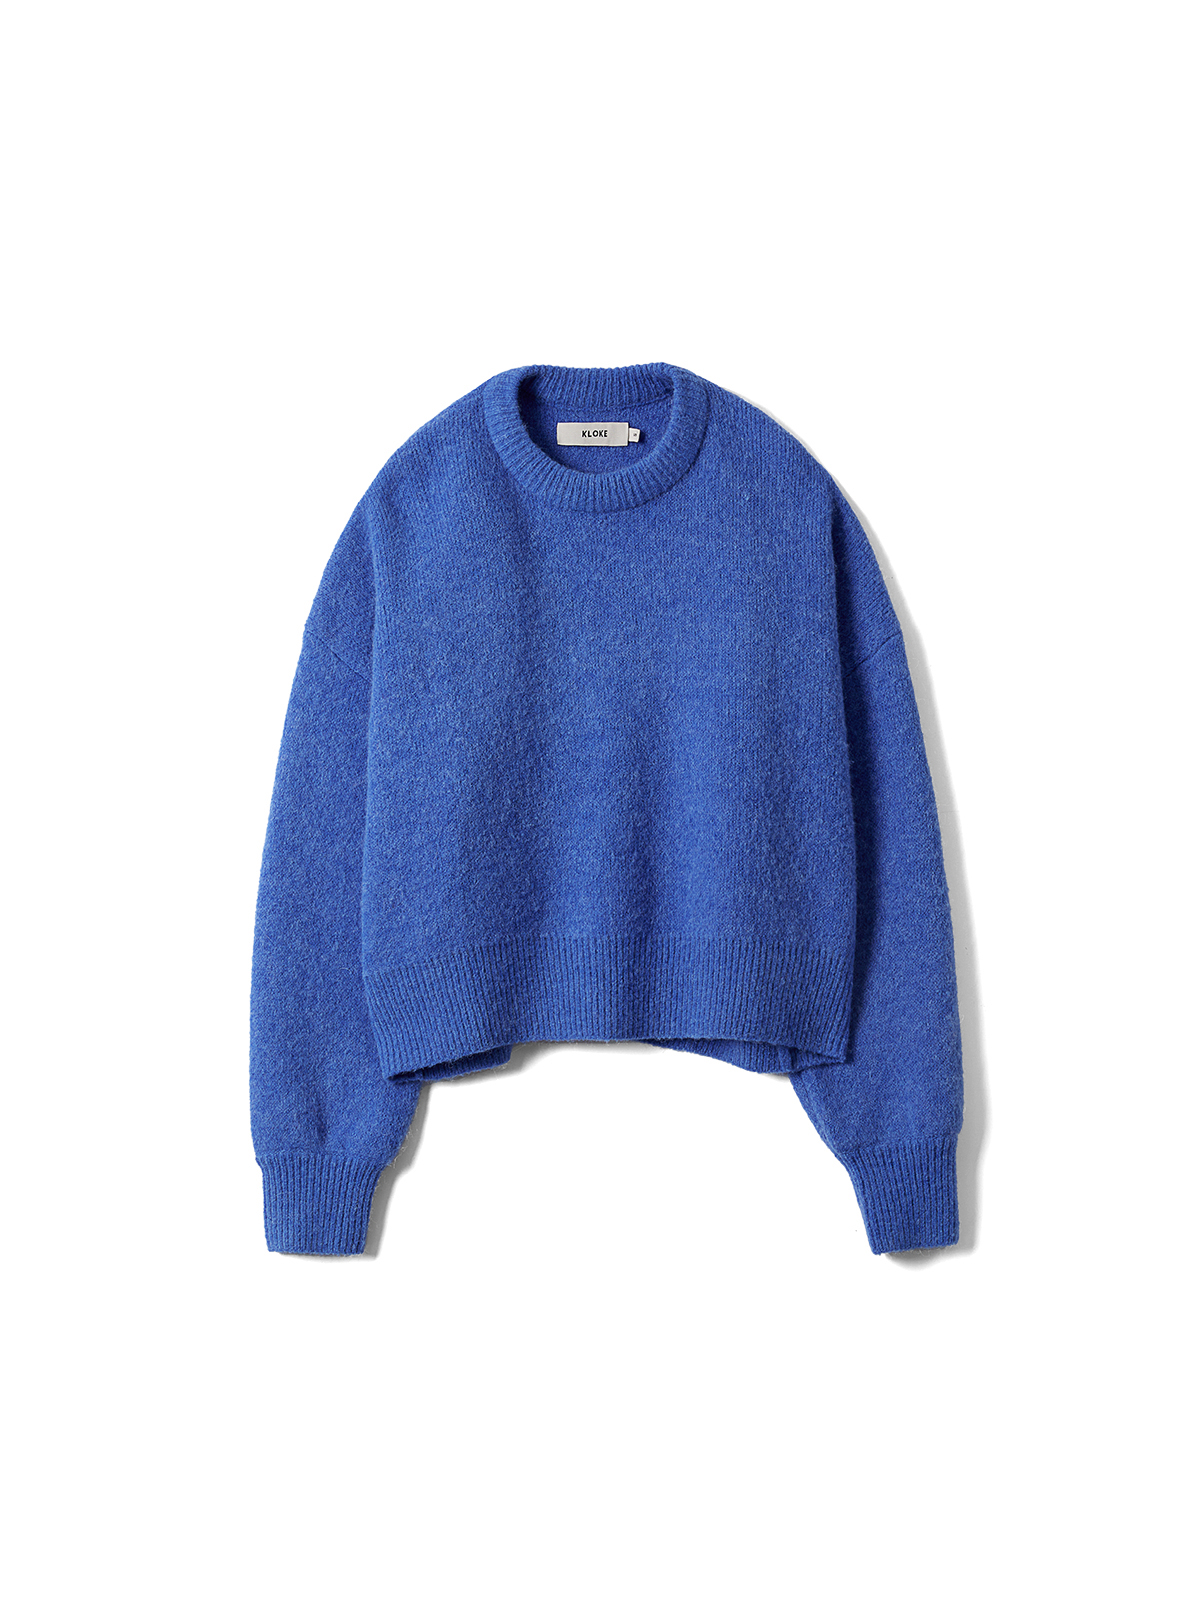 CIPHER SWEATER (NAUTICAL BLUE)